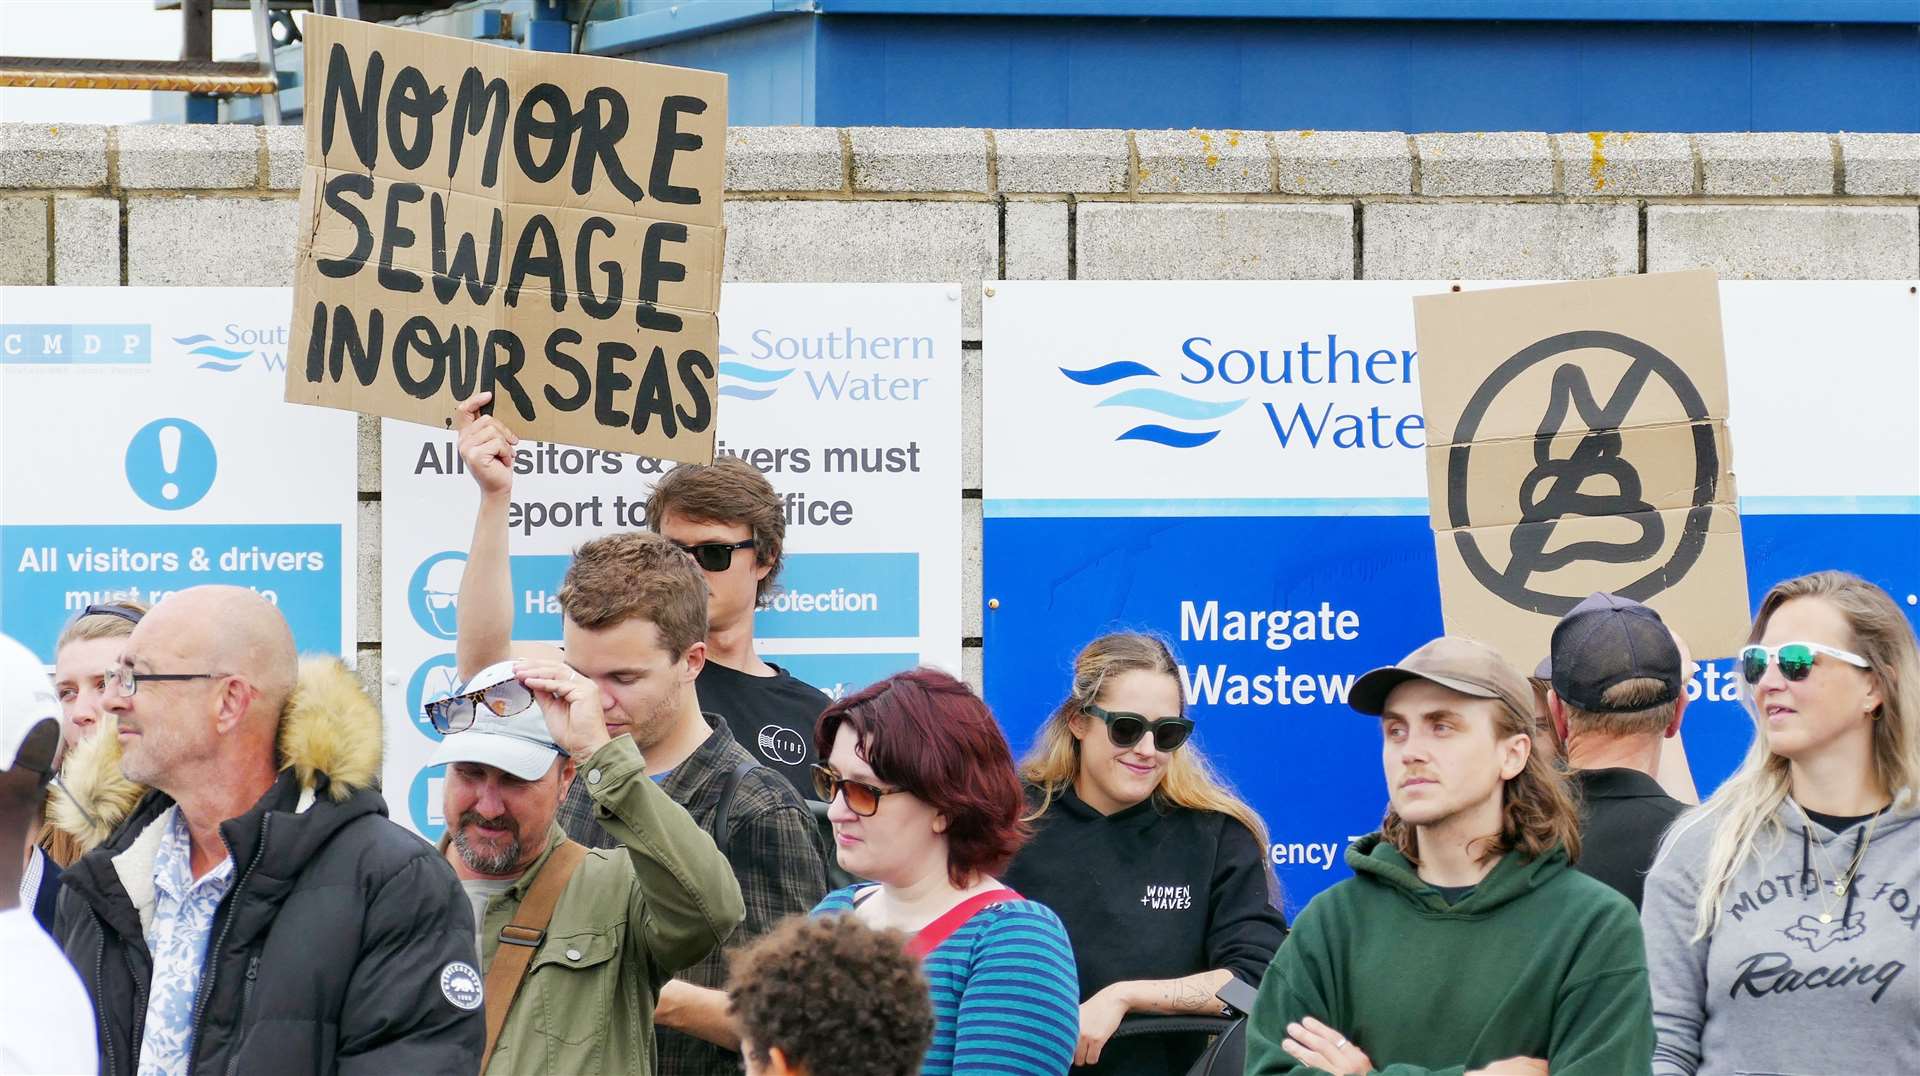 Protest against Southern Water sewage leaks in Thanet earlier this year. Picture: Frank Leppard photography